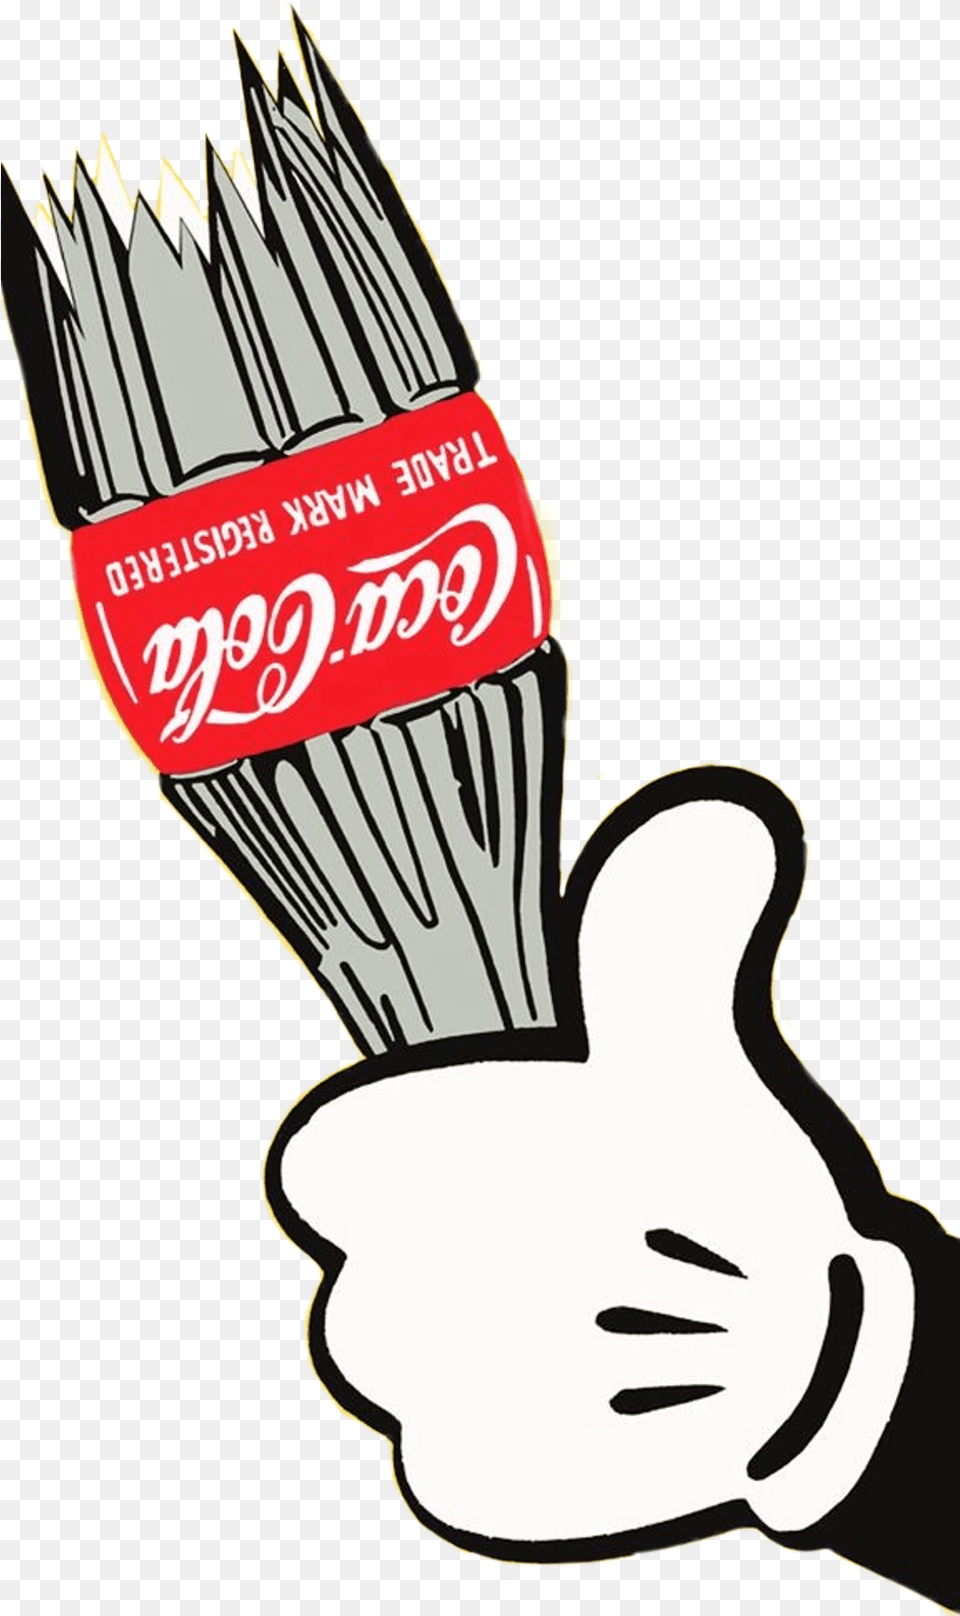 Mickeymouse Cocacola Coca Cola Street Art Pop Art Mickey Coca Cola Pop Art, Beverage, Coke, Soda, Person Png Image